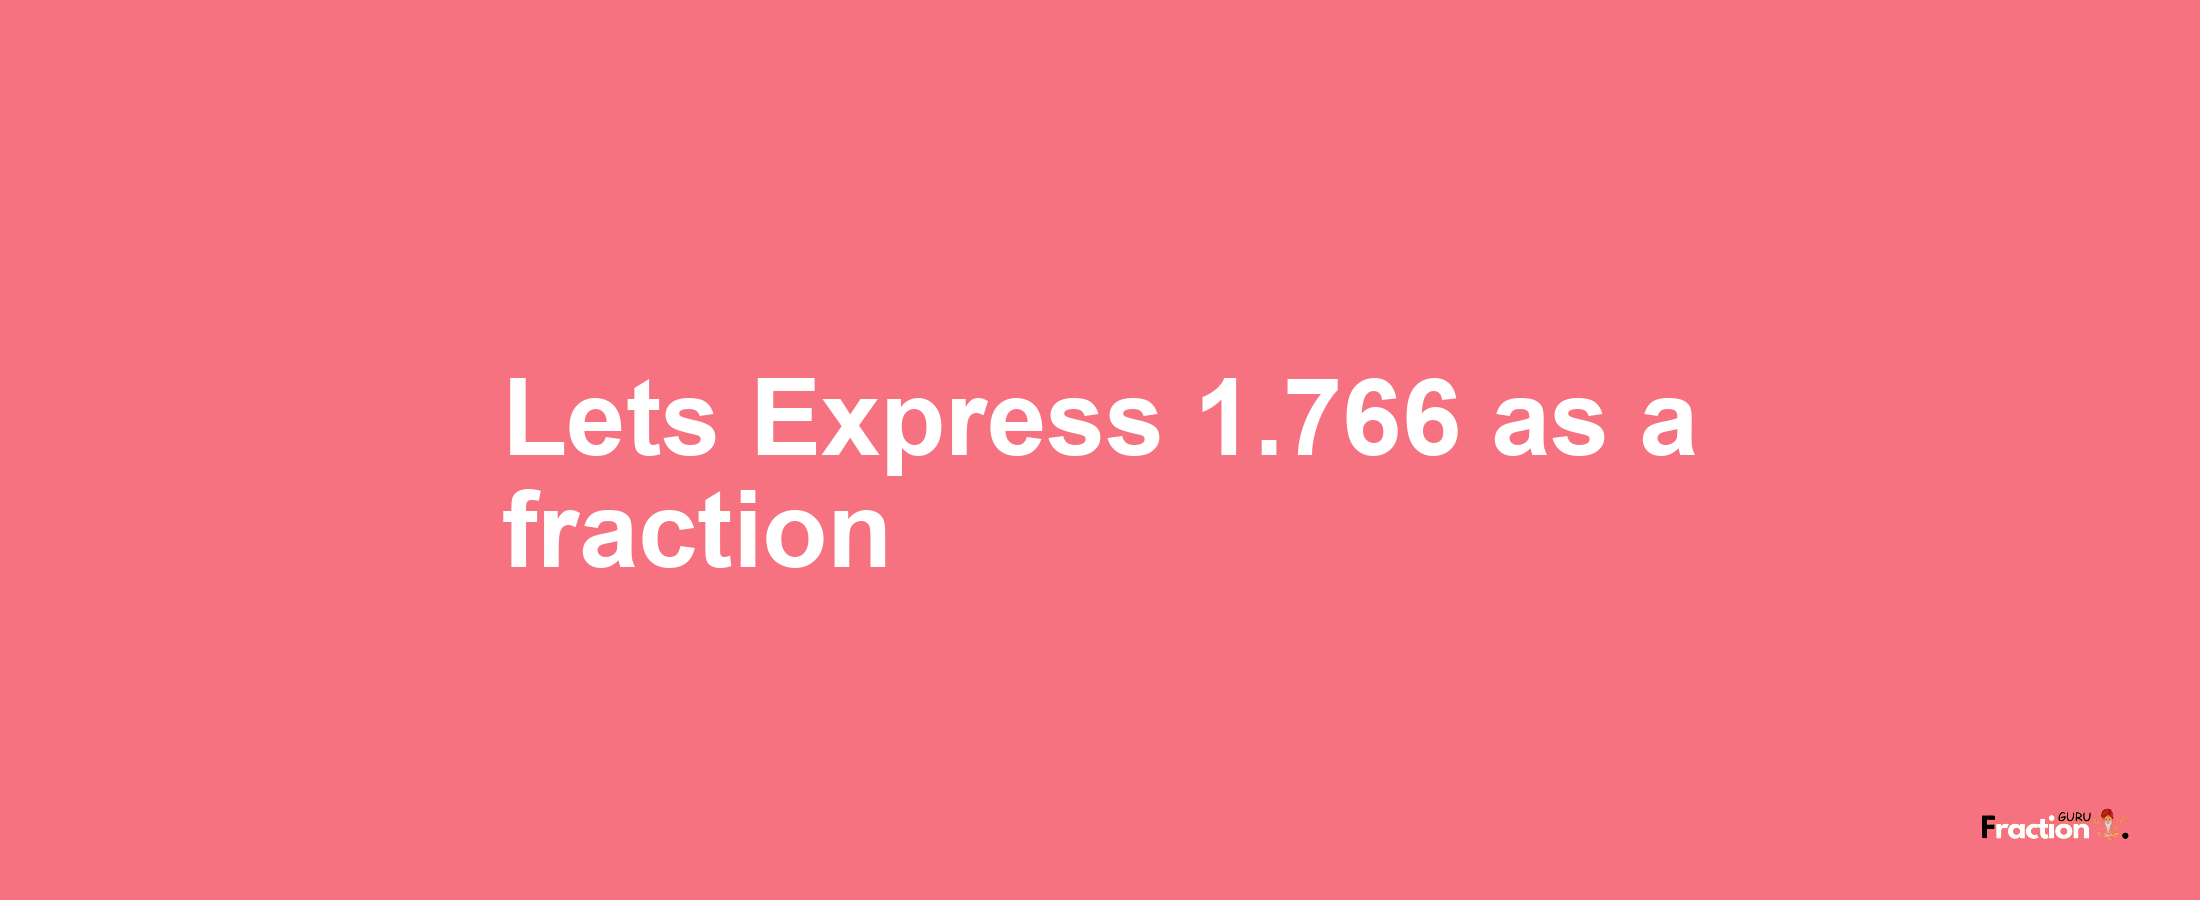 Lets Express 1.766 as afraction